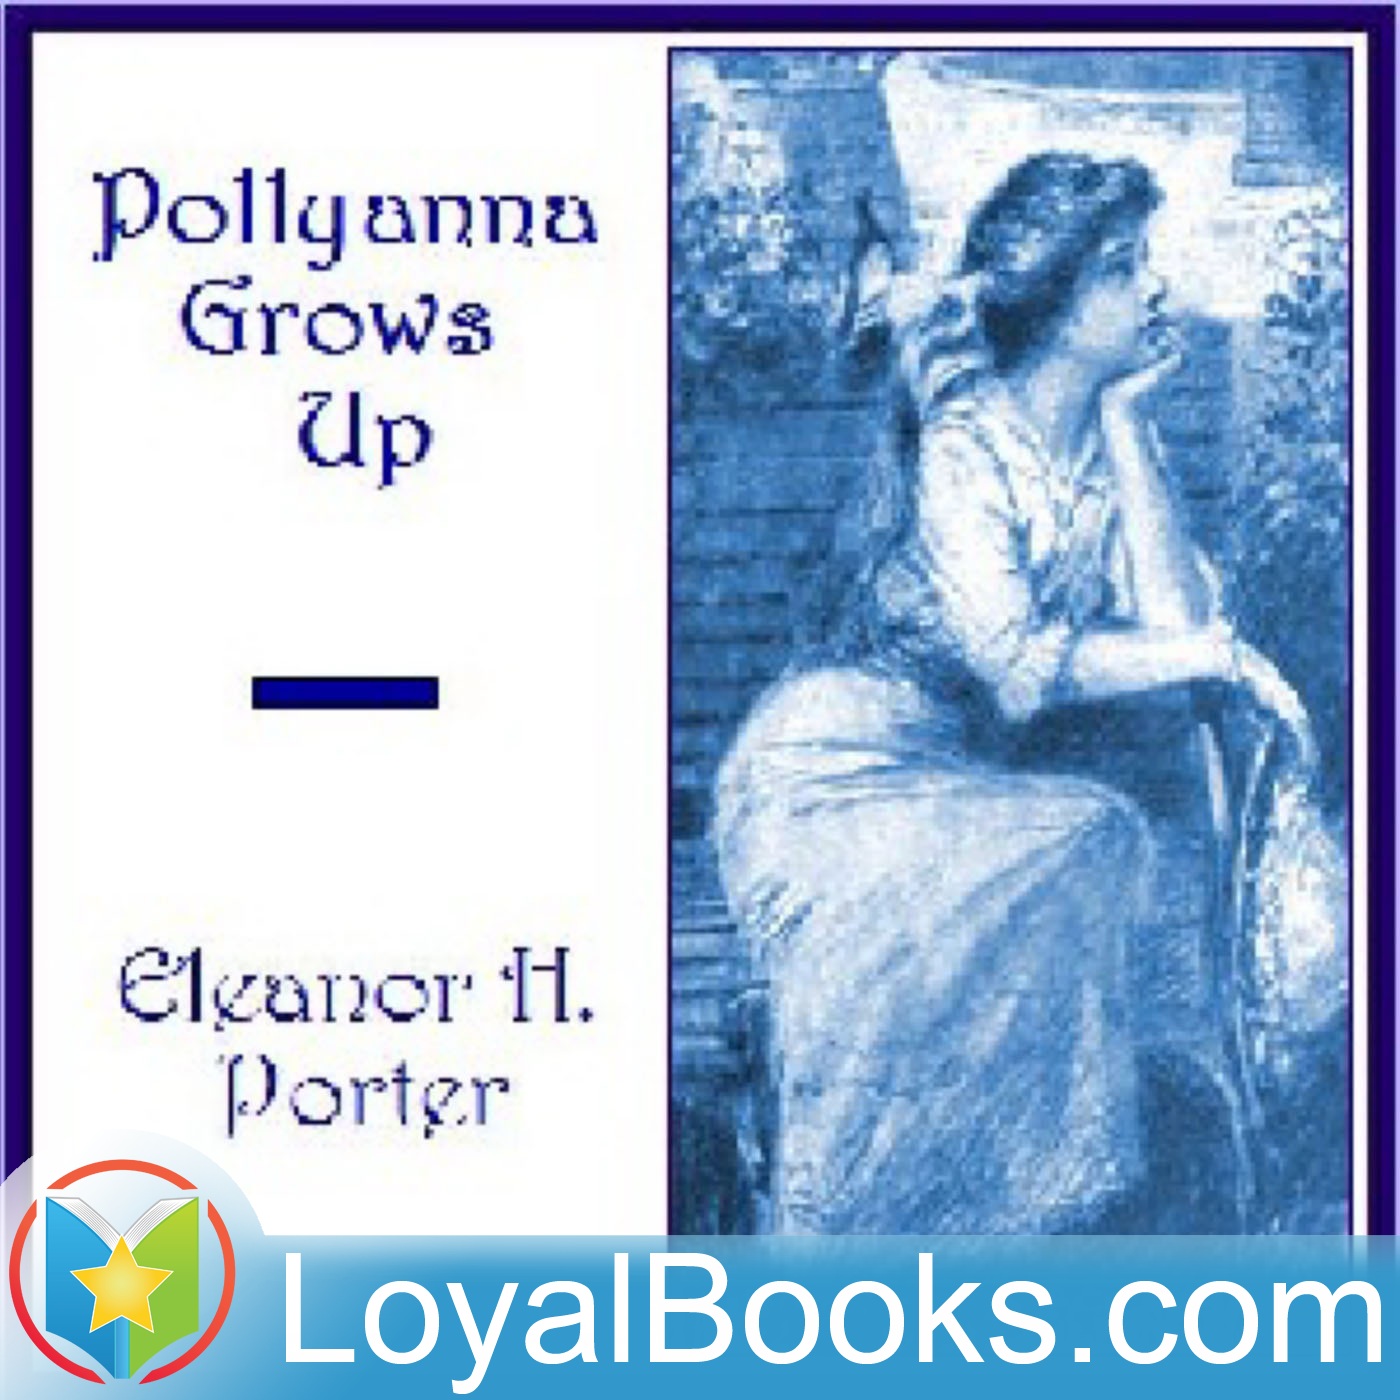 Pollyanna Grows Up by Eleanor H. Porter:Loyal Books